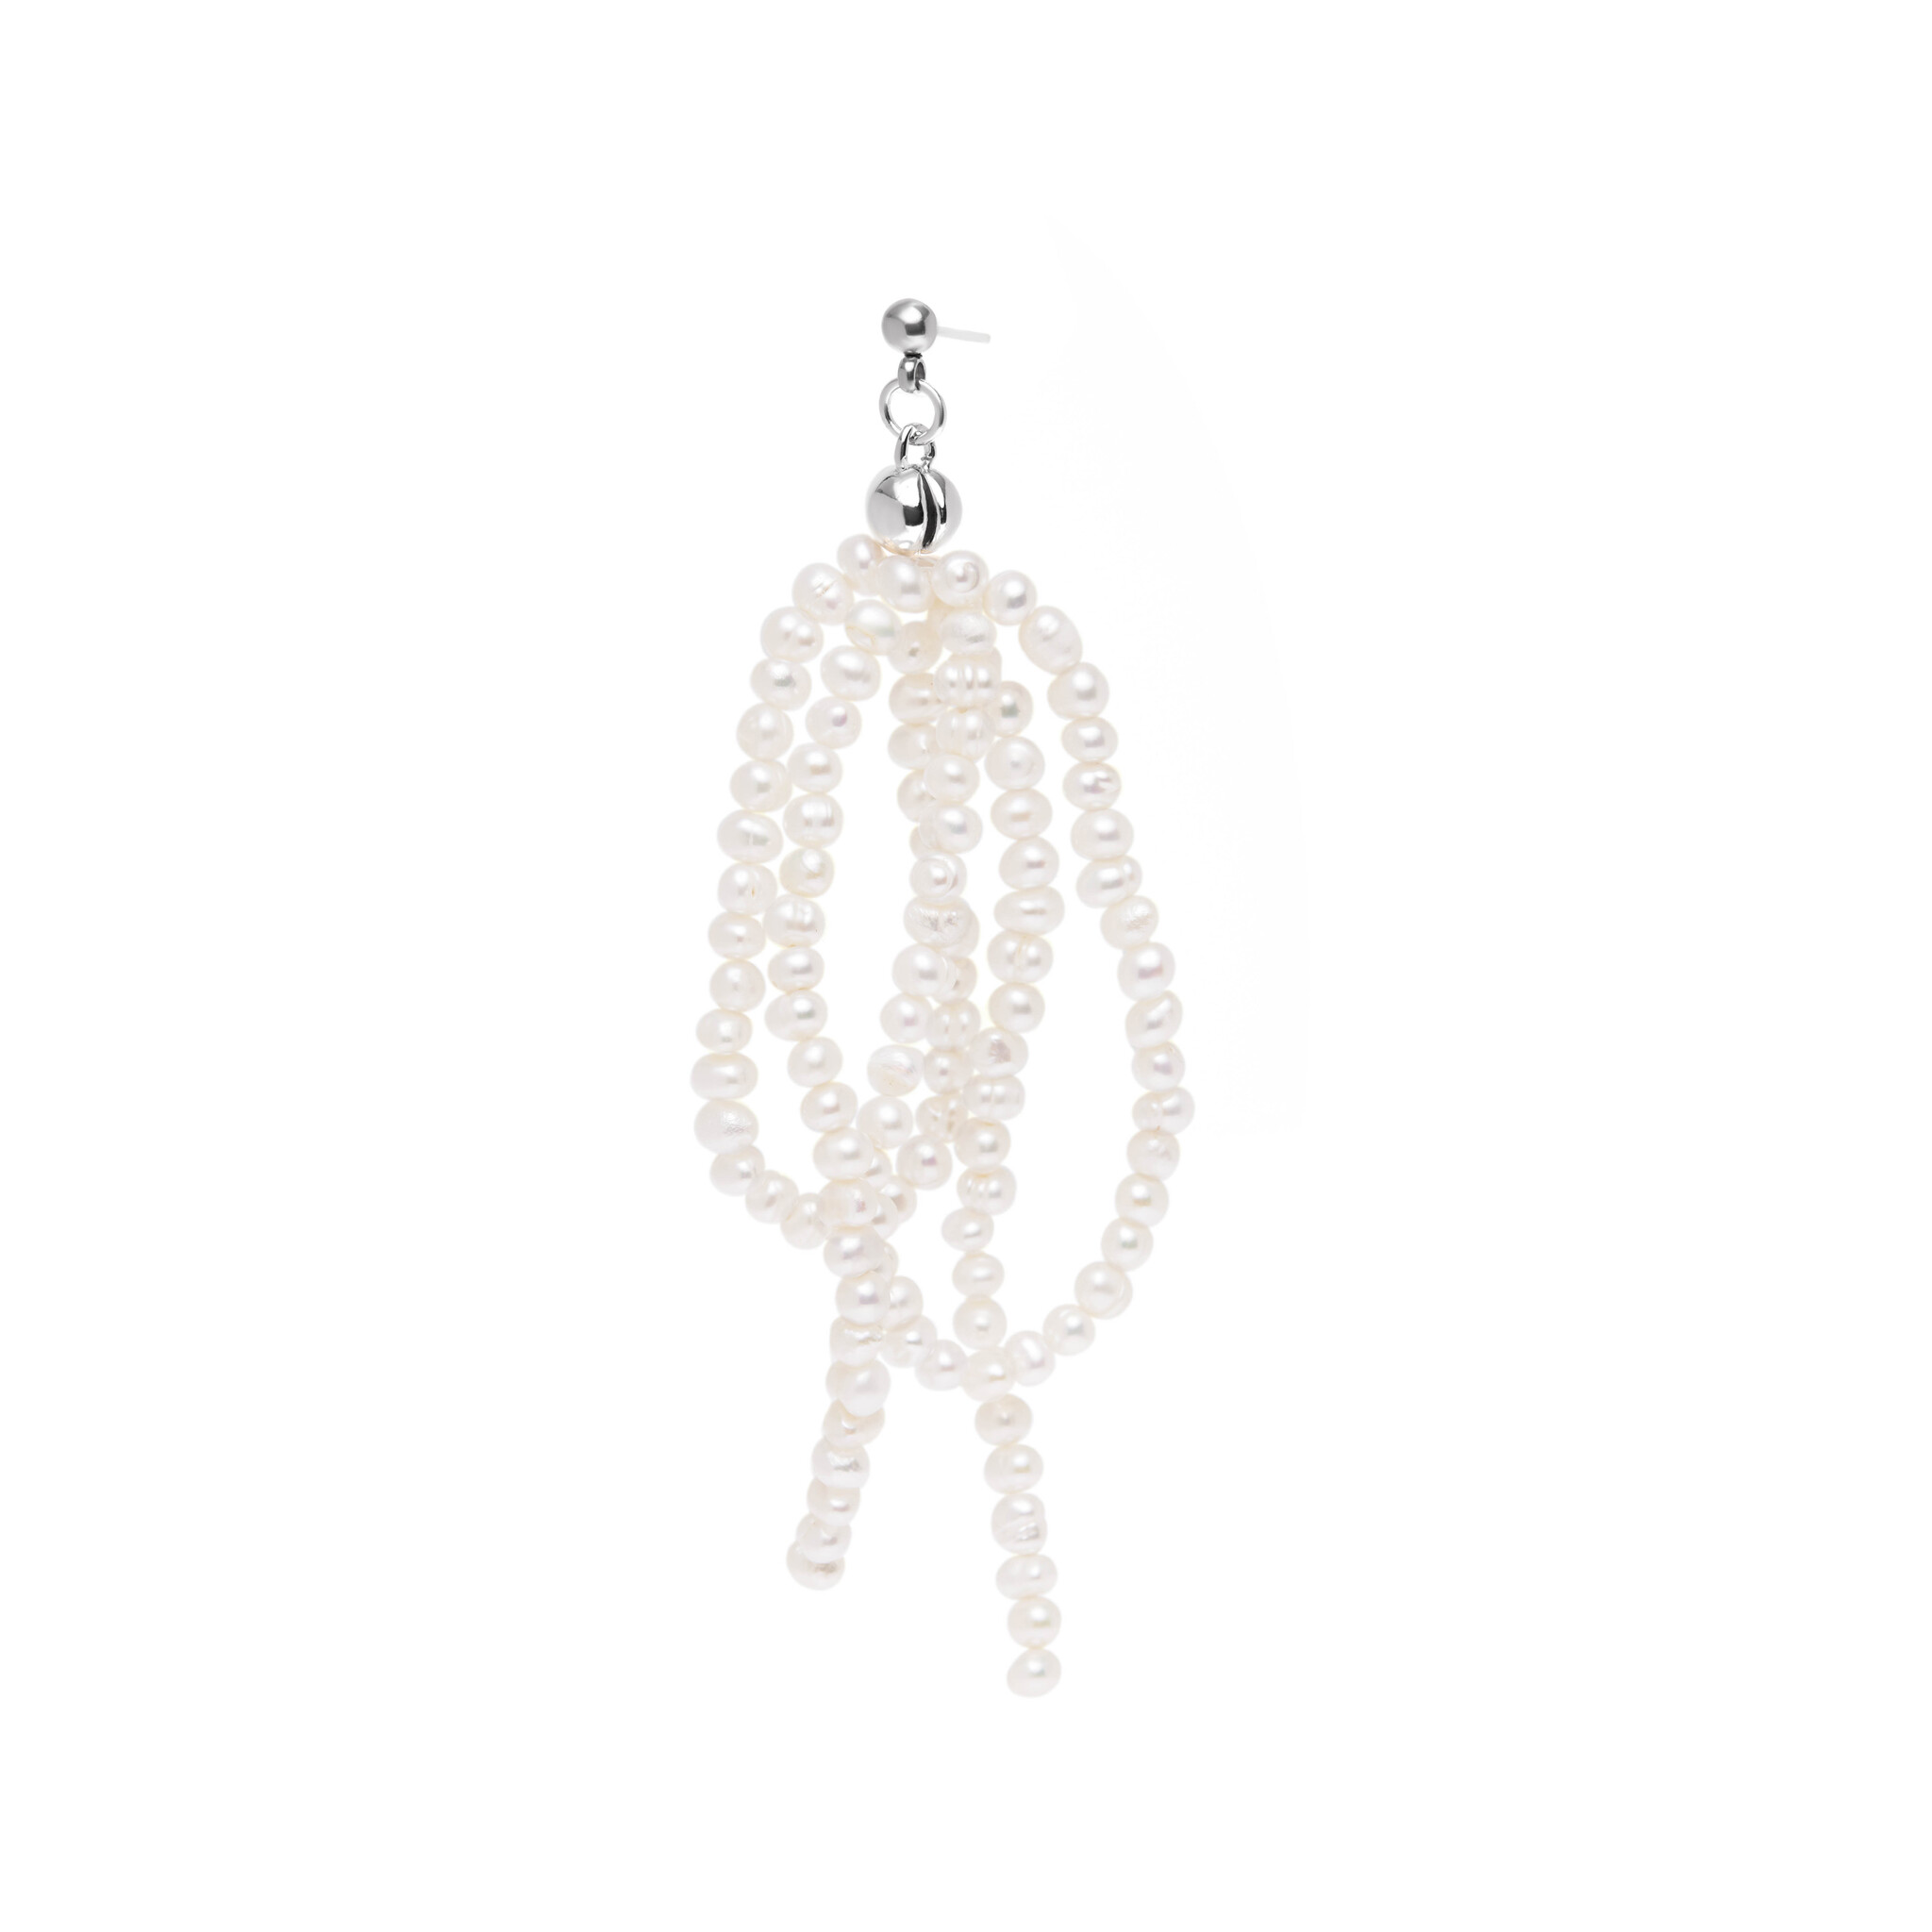 HOLLY JUNE Серьга Pearly Mess Earring holly june брошь pearly nuance brooch